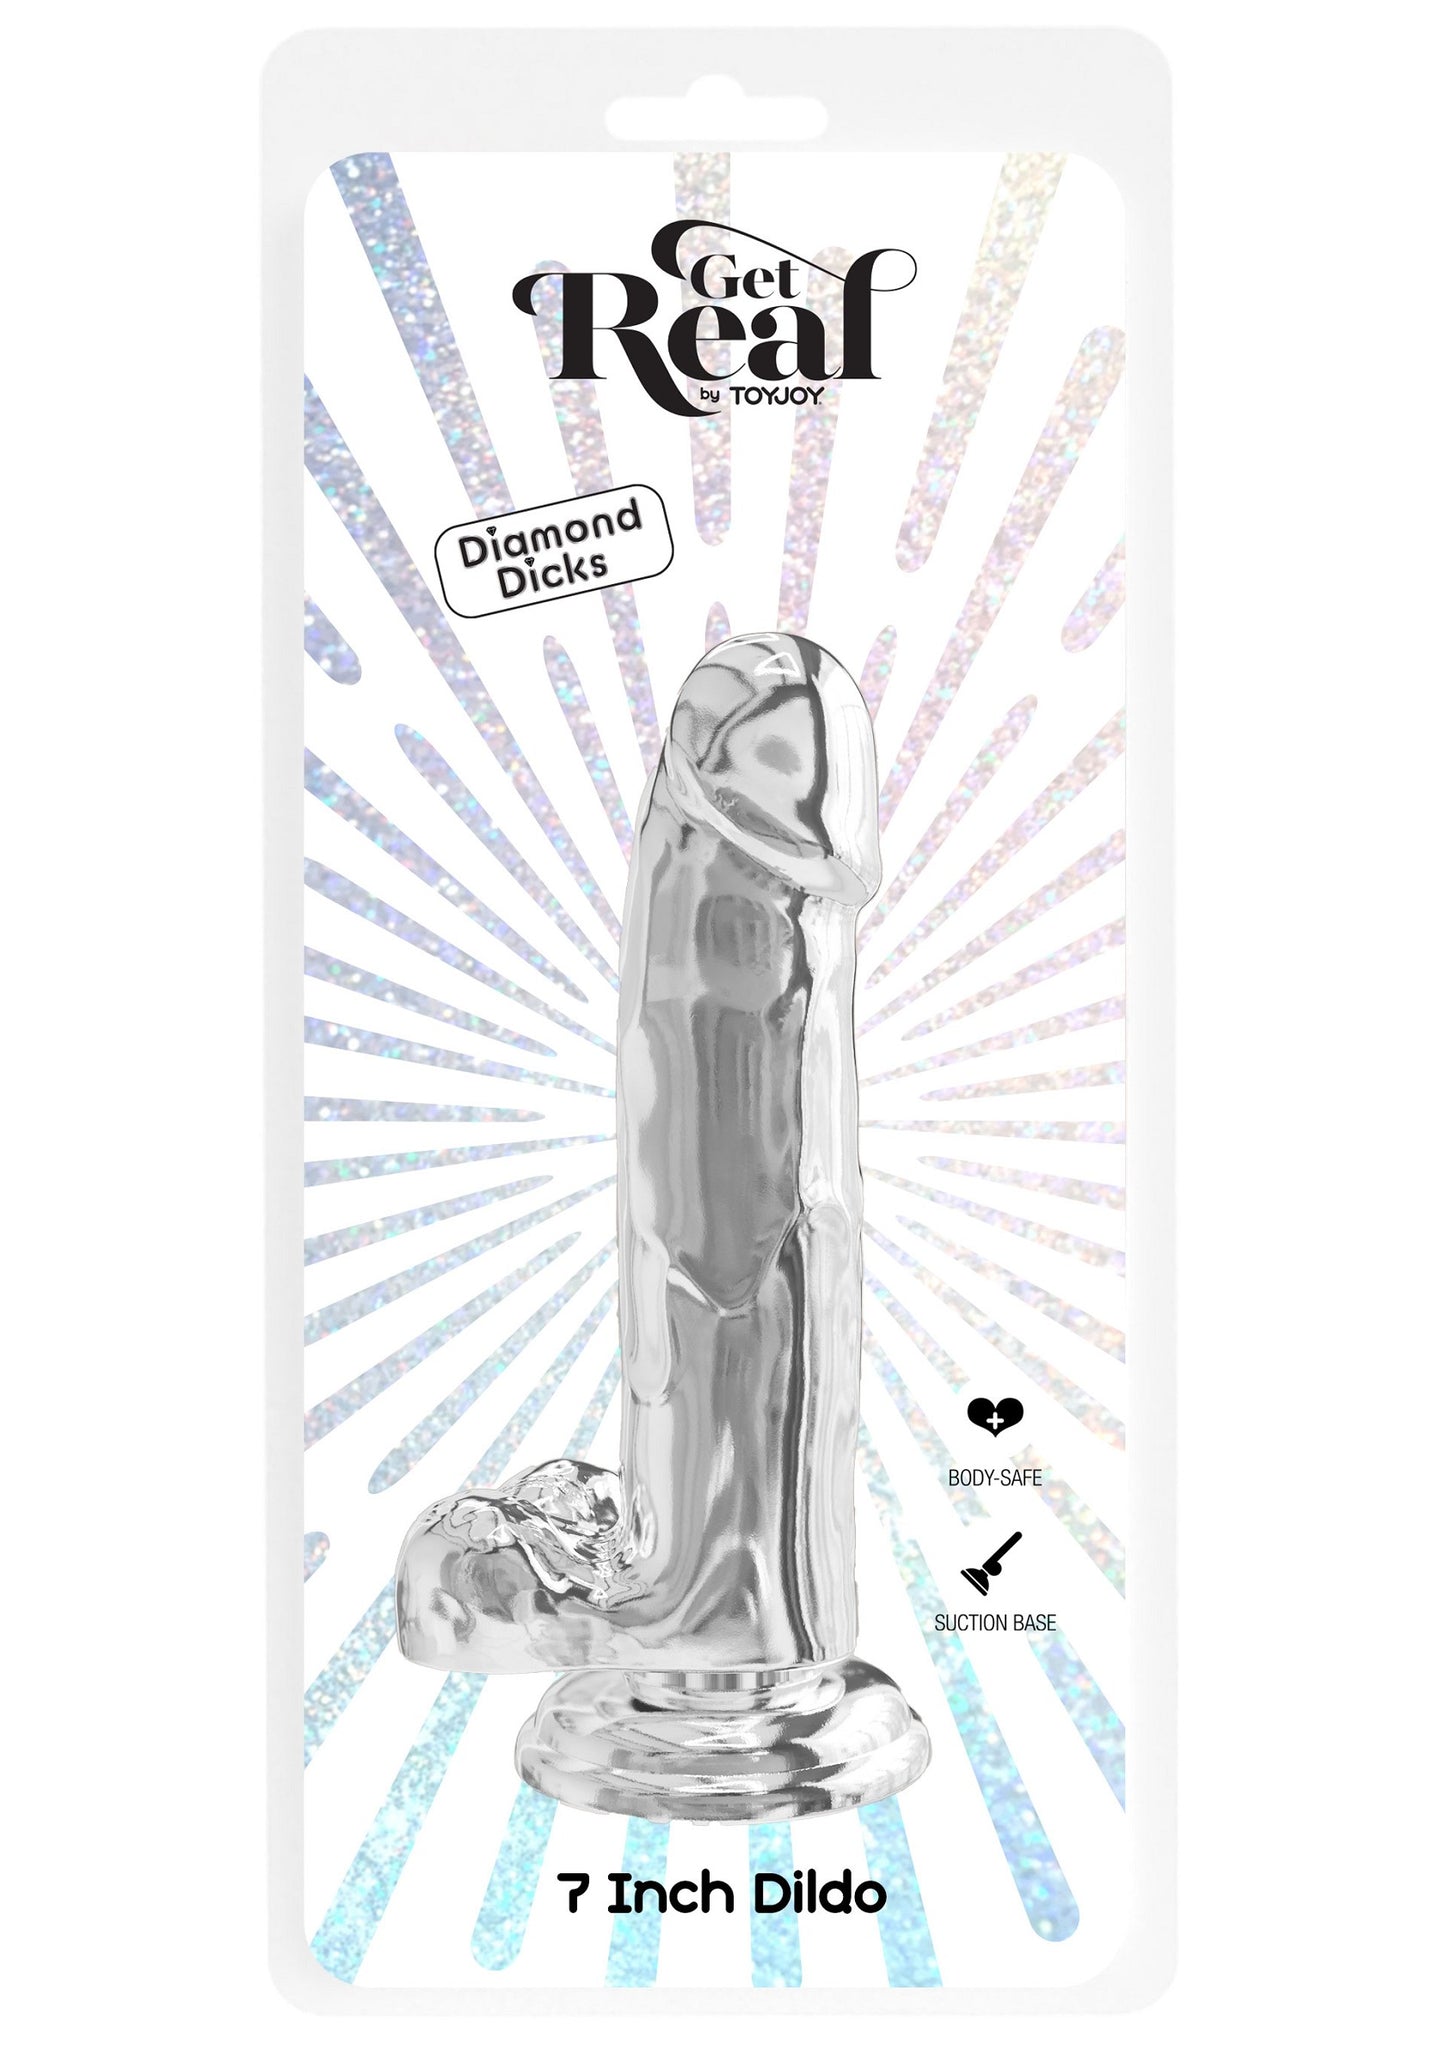 ToyJoy Get Real Clear Dildo with Balls 7' TRANSPA - 2